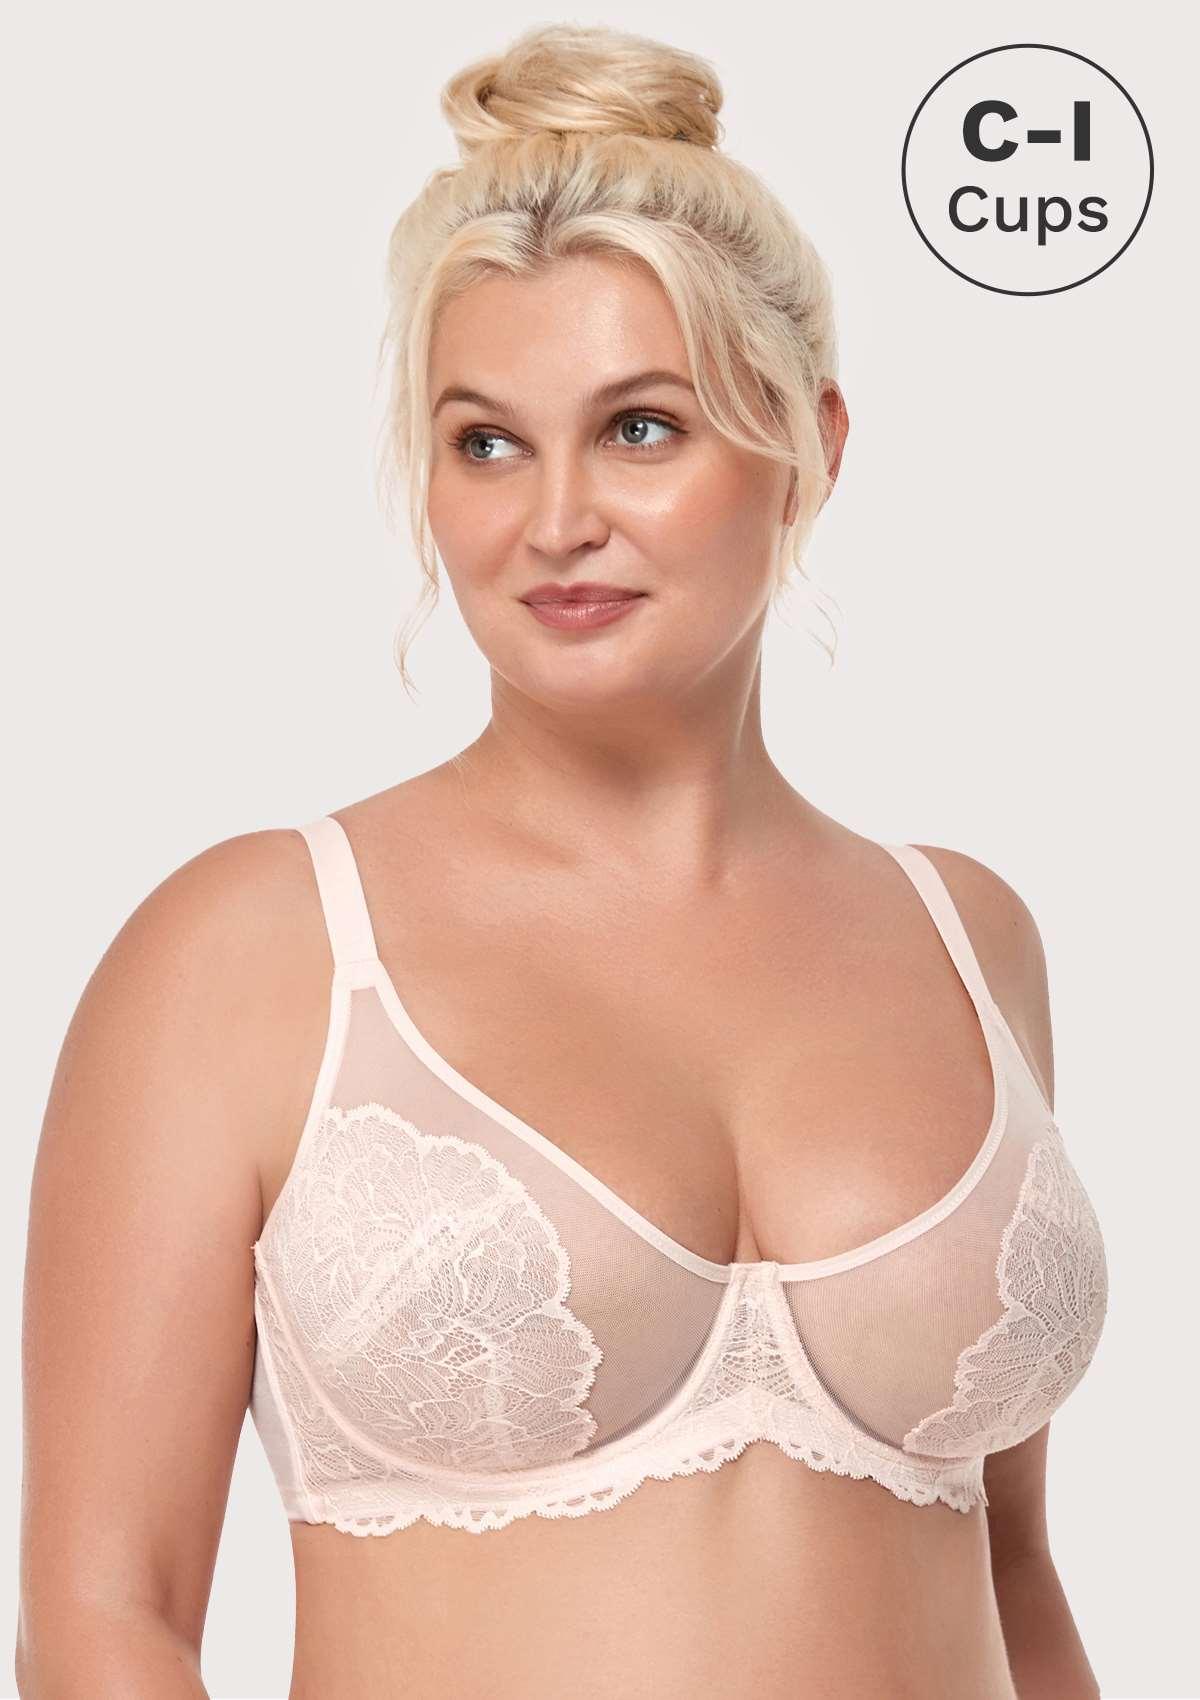 HSIA Blossom Matching Lacey Underwear And Bra Set: Sexy Lace Bra - Dusty Peach / 42 / C